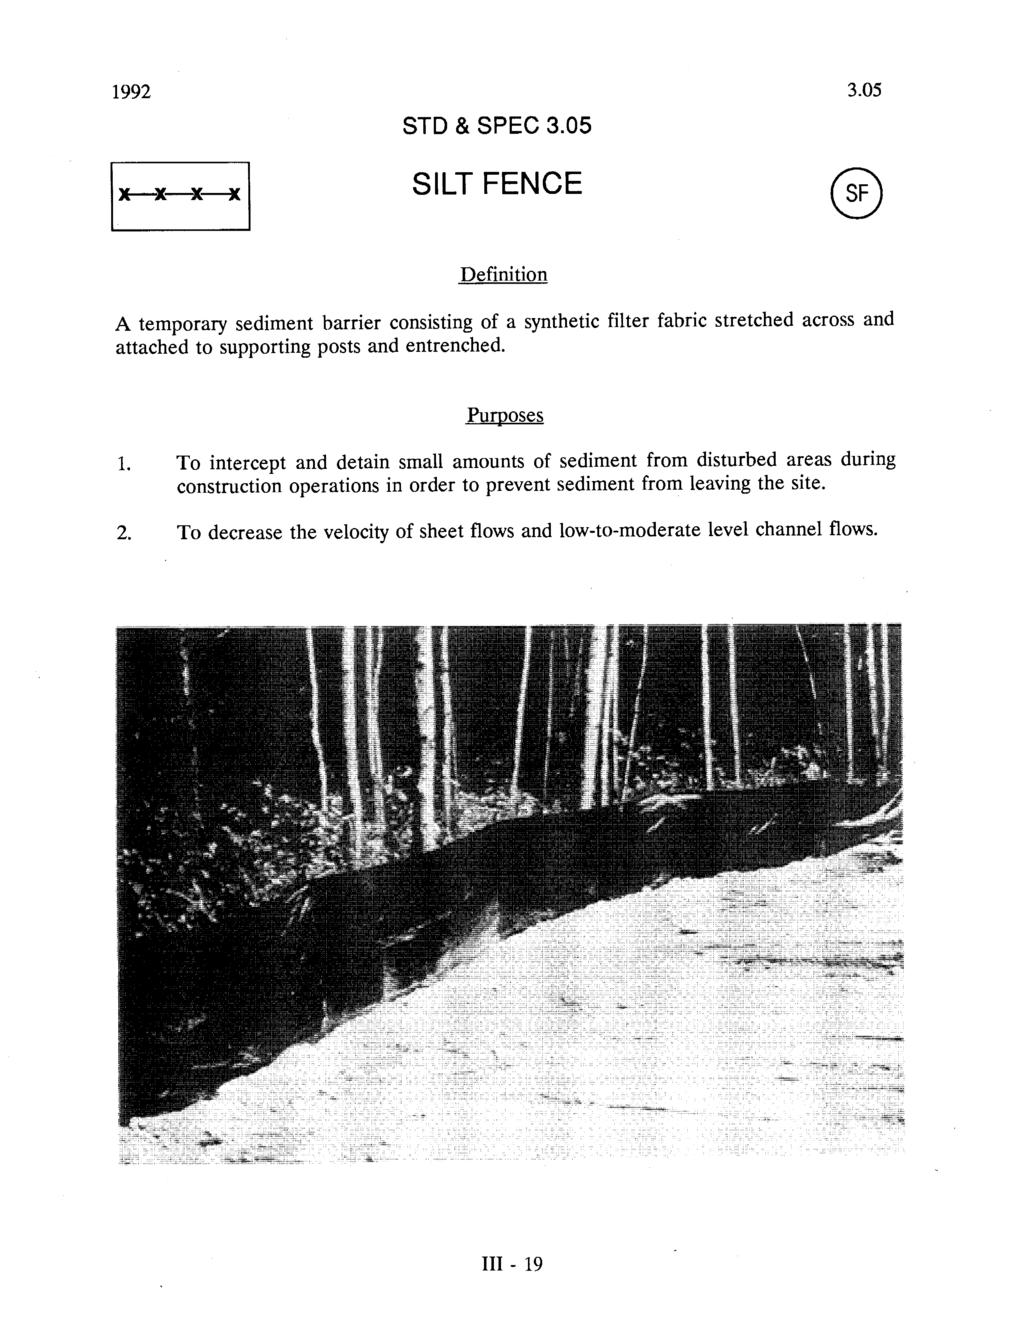 1992 3.5 STD & SPEC 3.5 SILT FENCE Definition A temporary sediment barrier consisting of a synthetic filter fabric stretched across and attached to supporting posts and entrenched. Purposes 1.